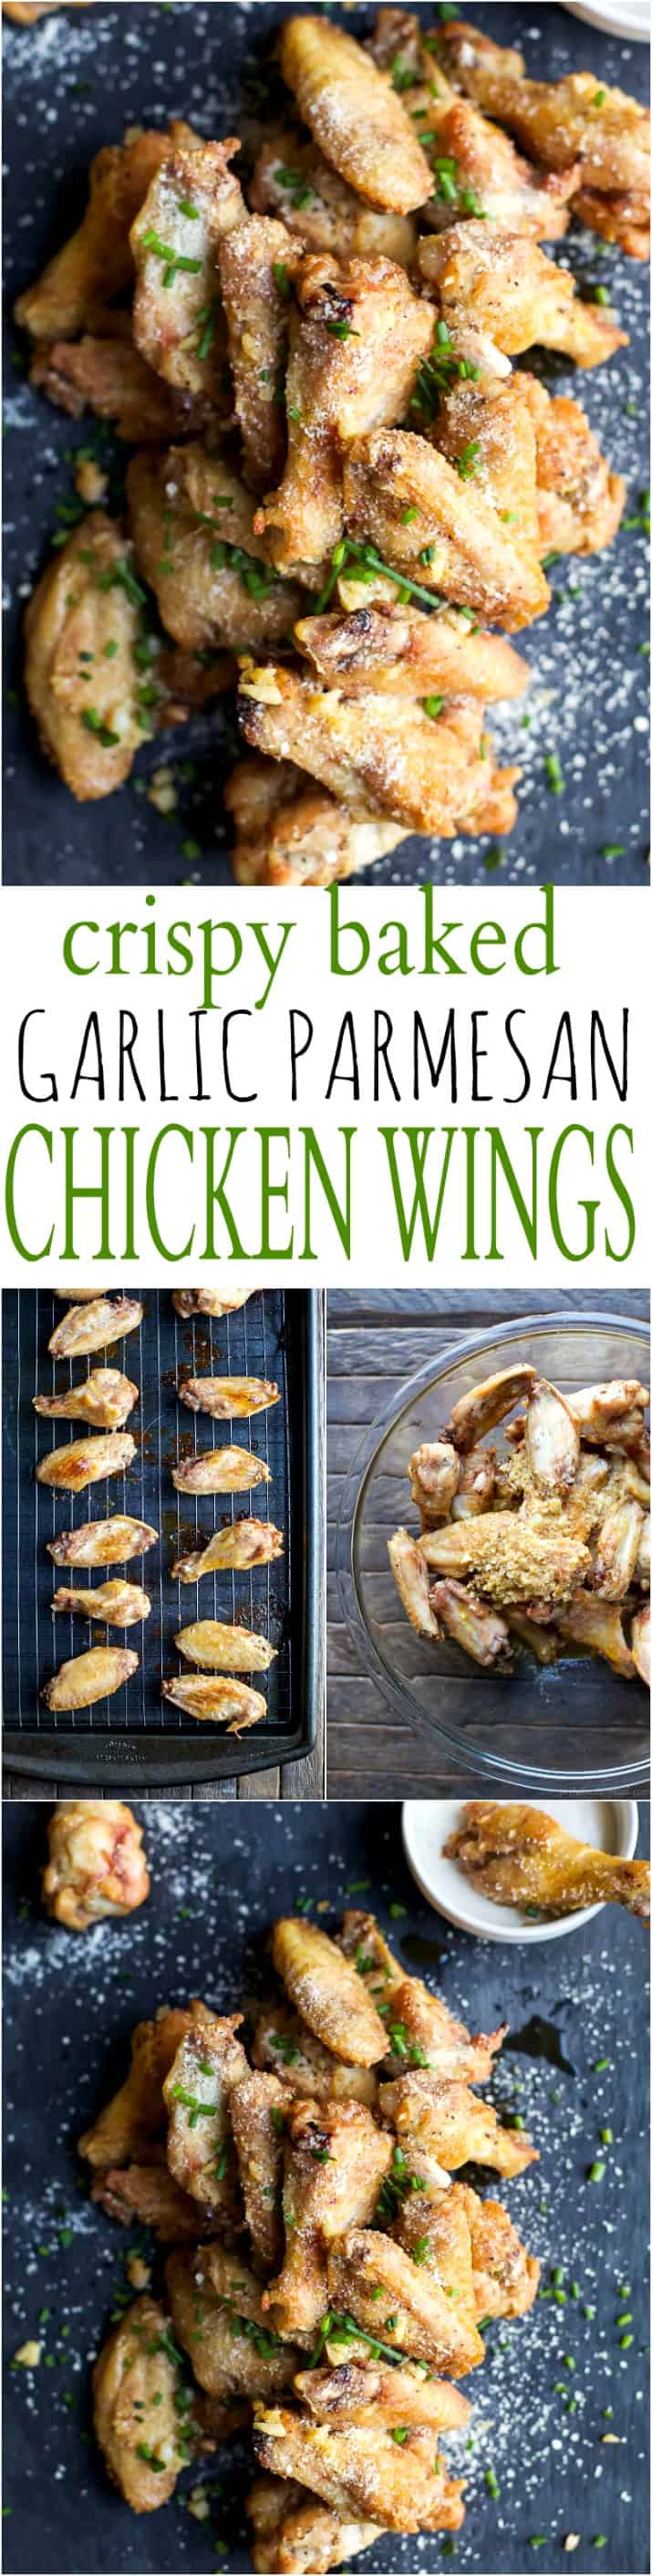 Collage for Crispy Baked Garlic Parmesan Chicken Wings recipe